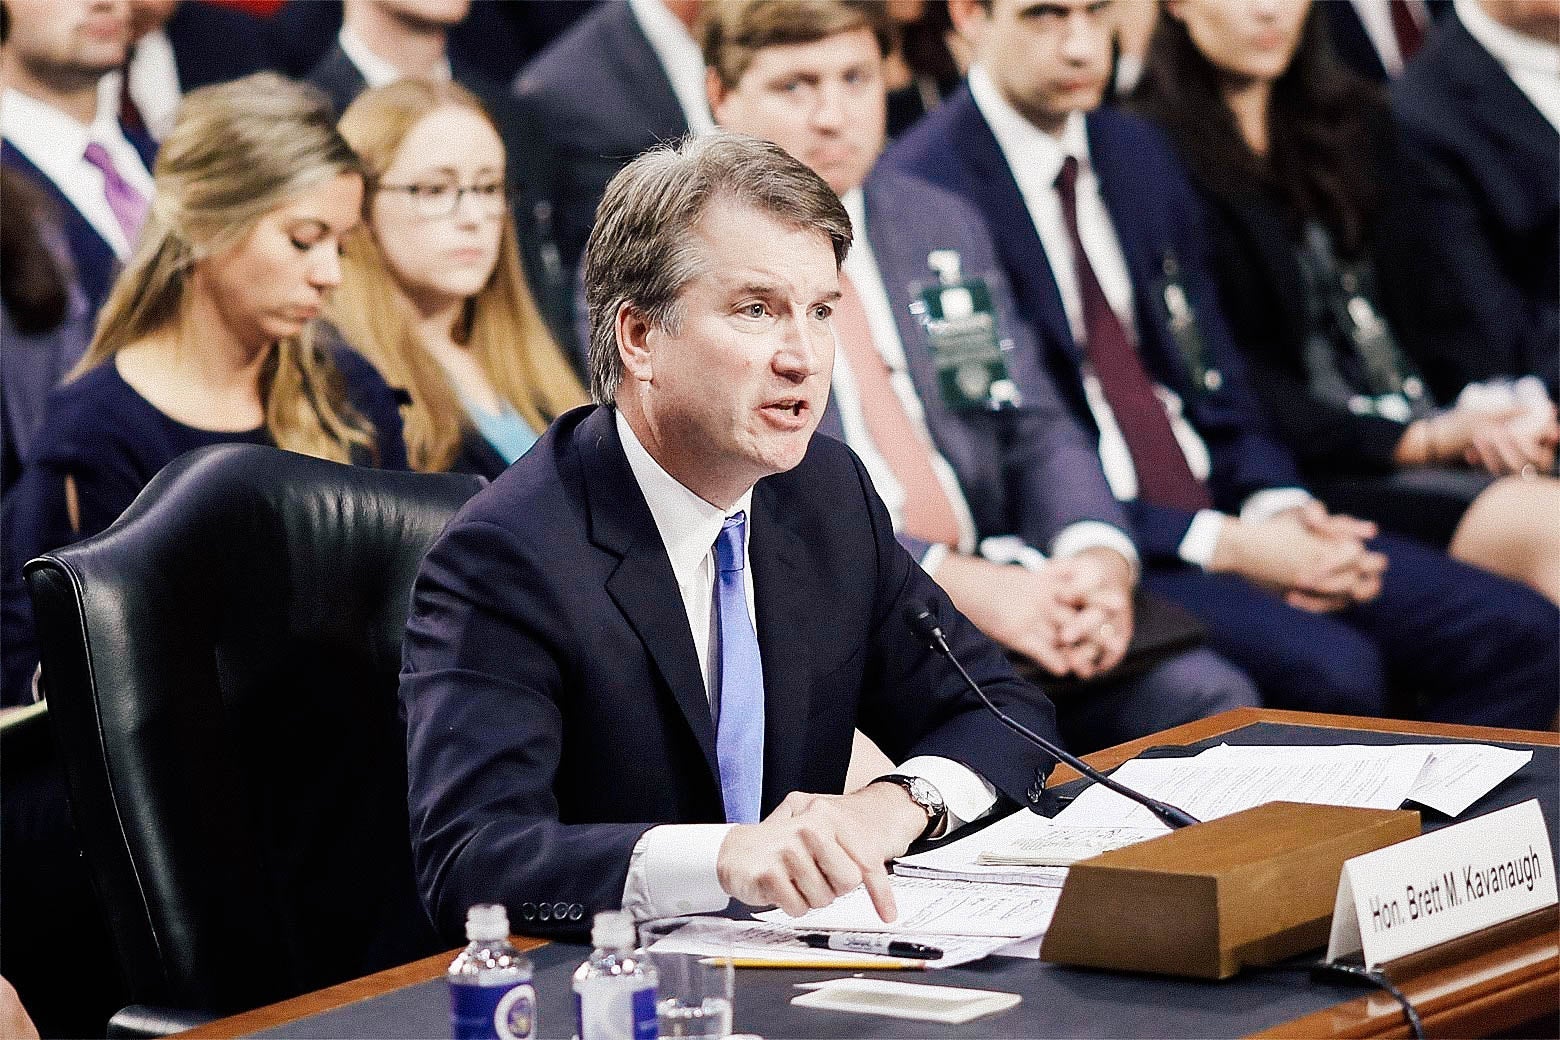 Kavanaugh points a finger toward the desk at which he's seated and speaking from in a confirmation hearing.